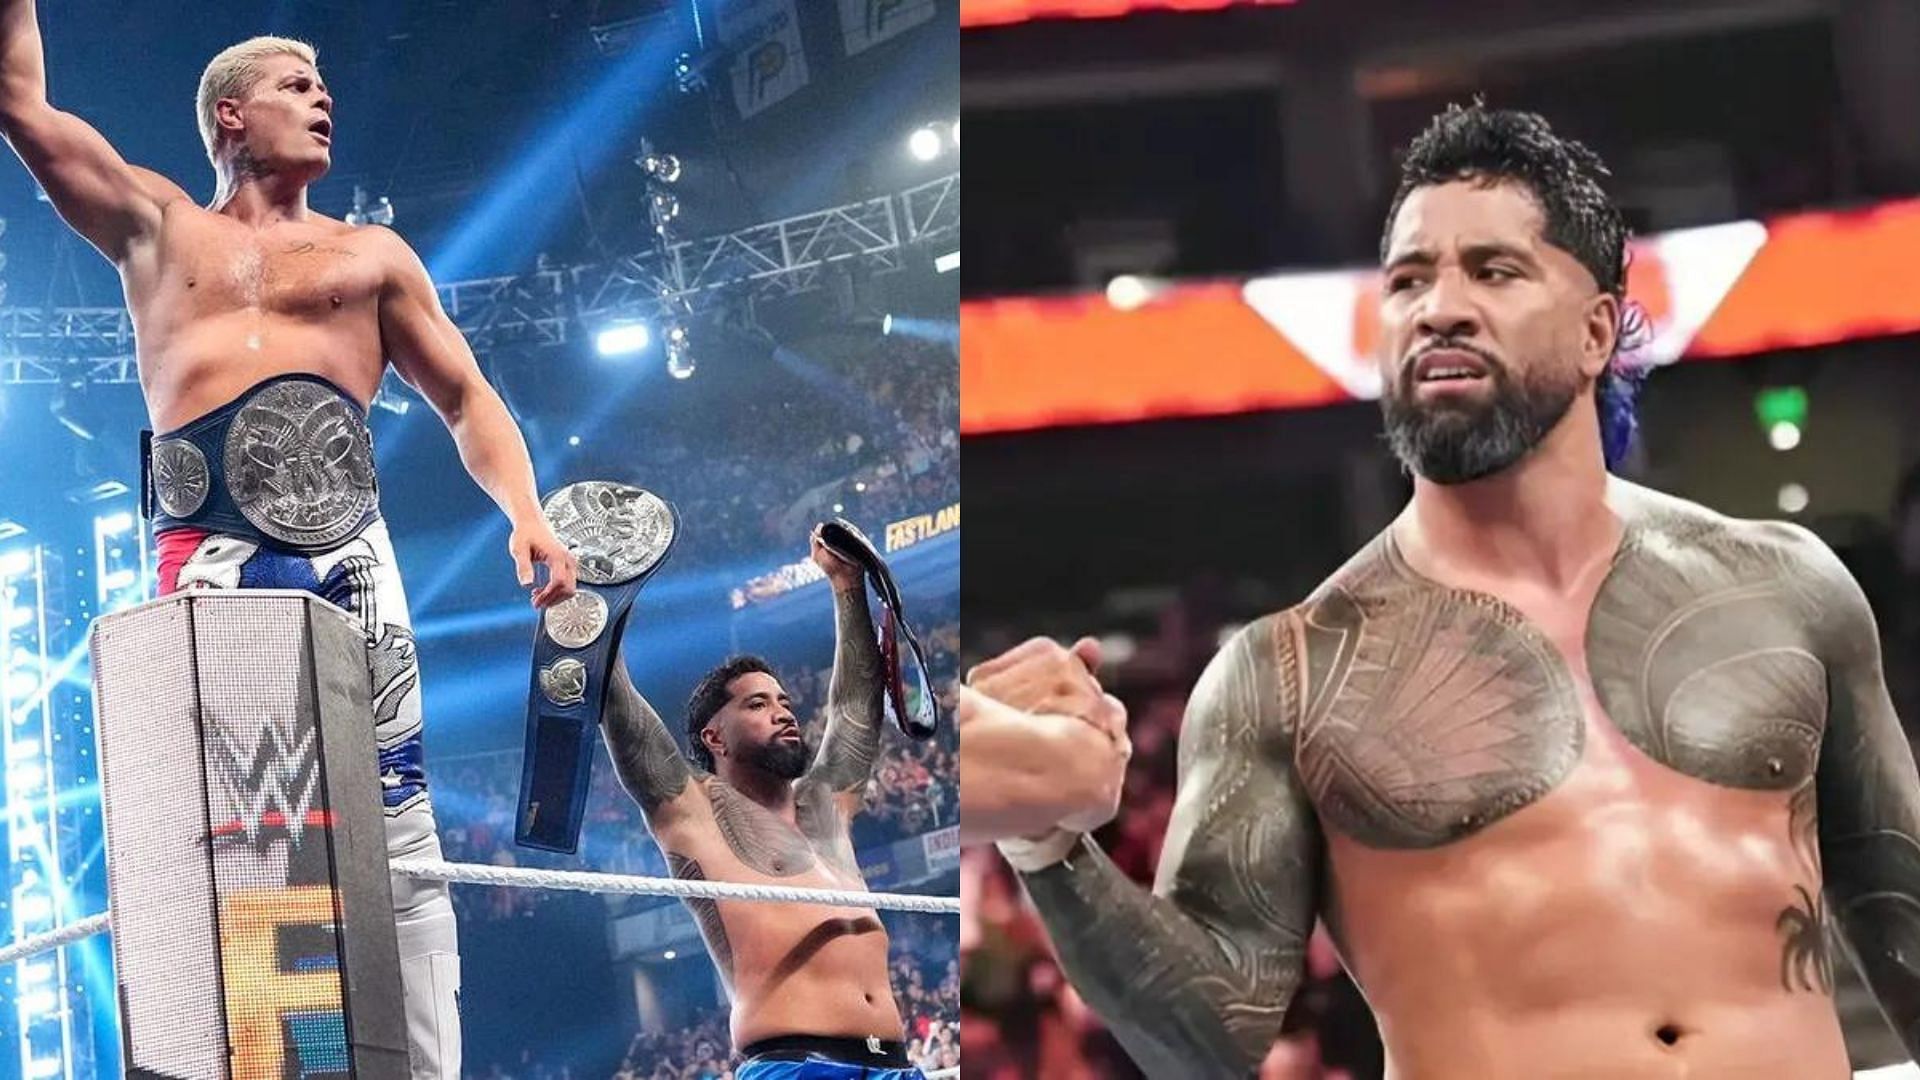 Jey Uso regained the Undisputed WWE Tag Team Championships